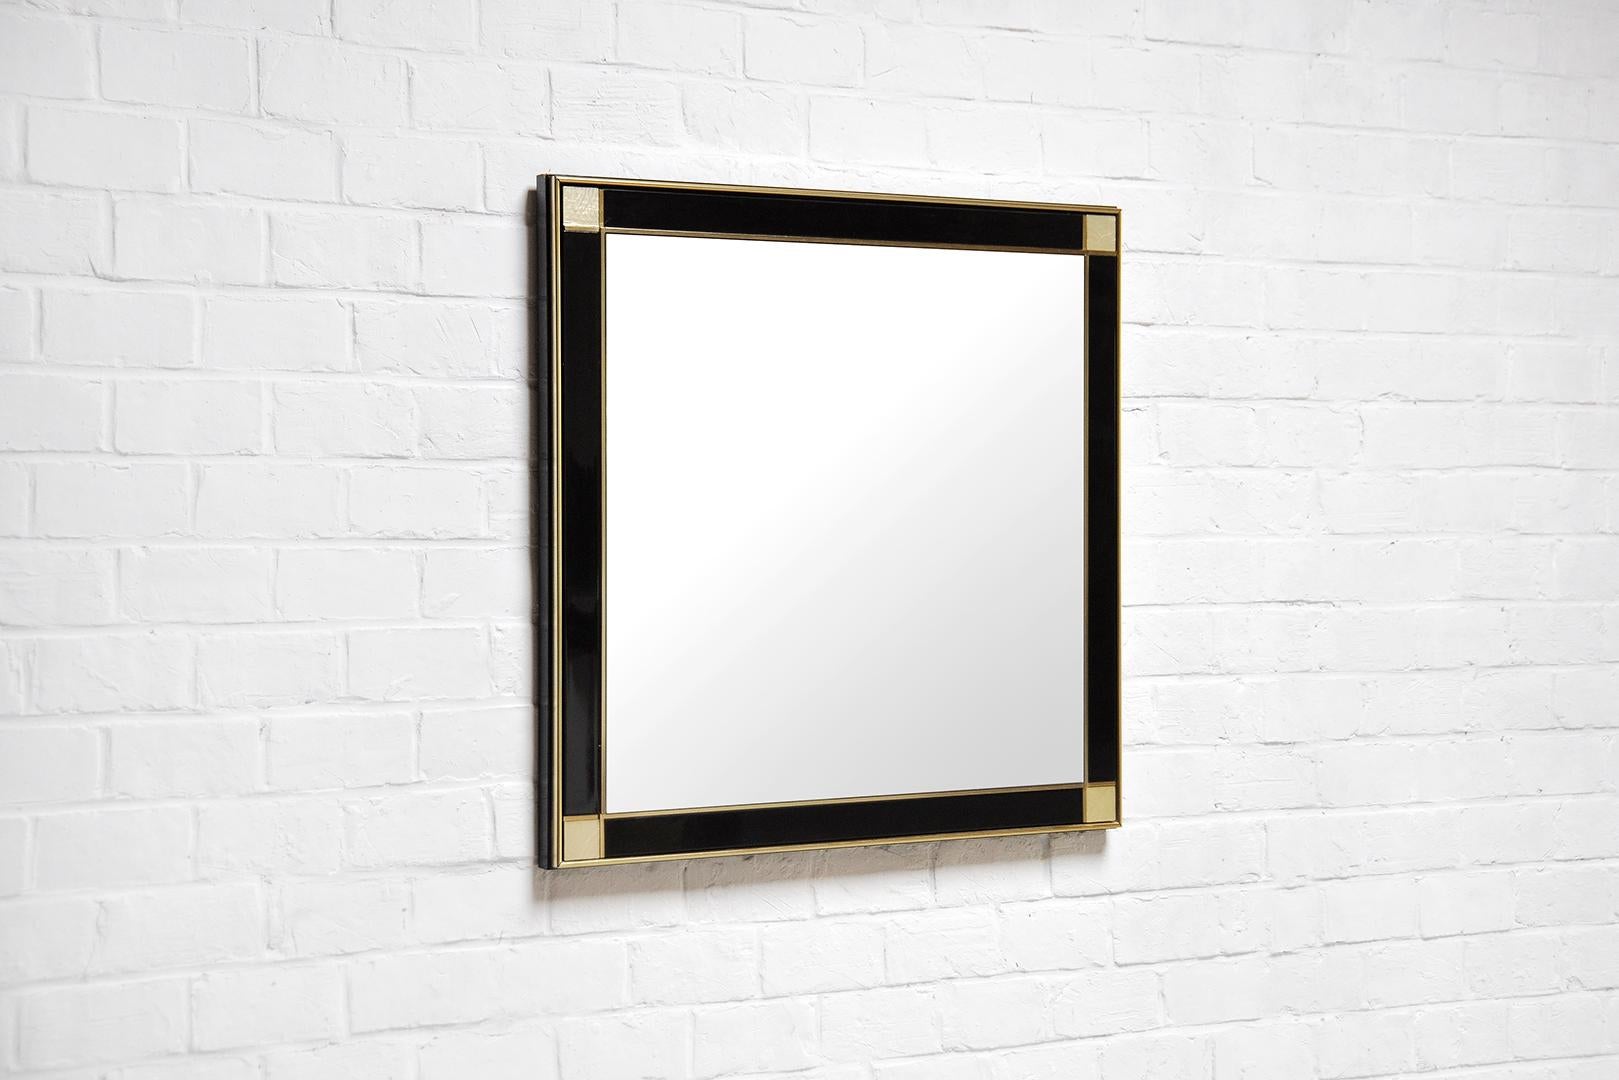 French Pierre Cardin Black Lacquered Mirror with Brass Details, 1980s